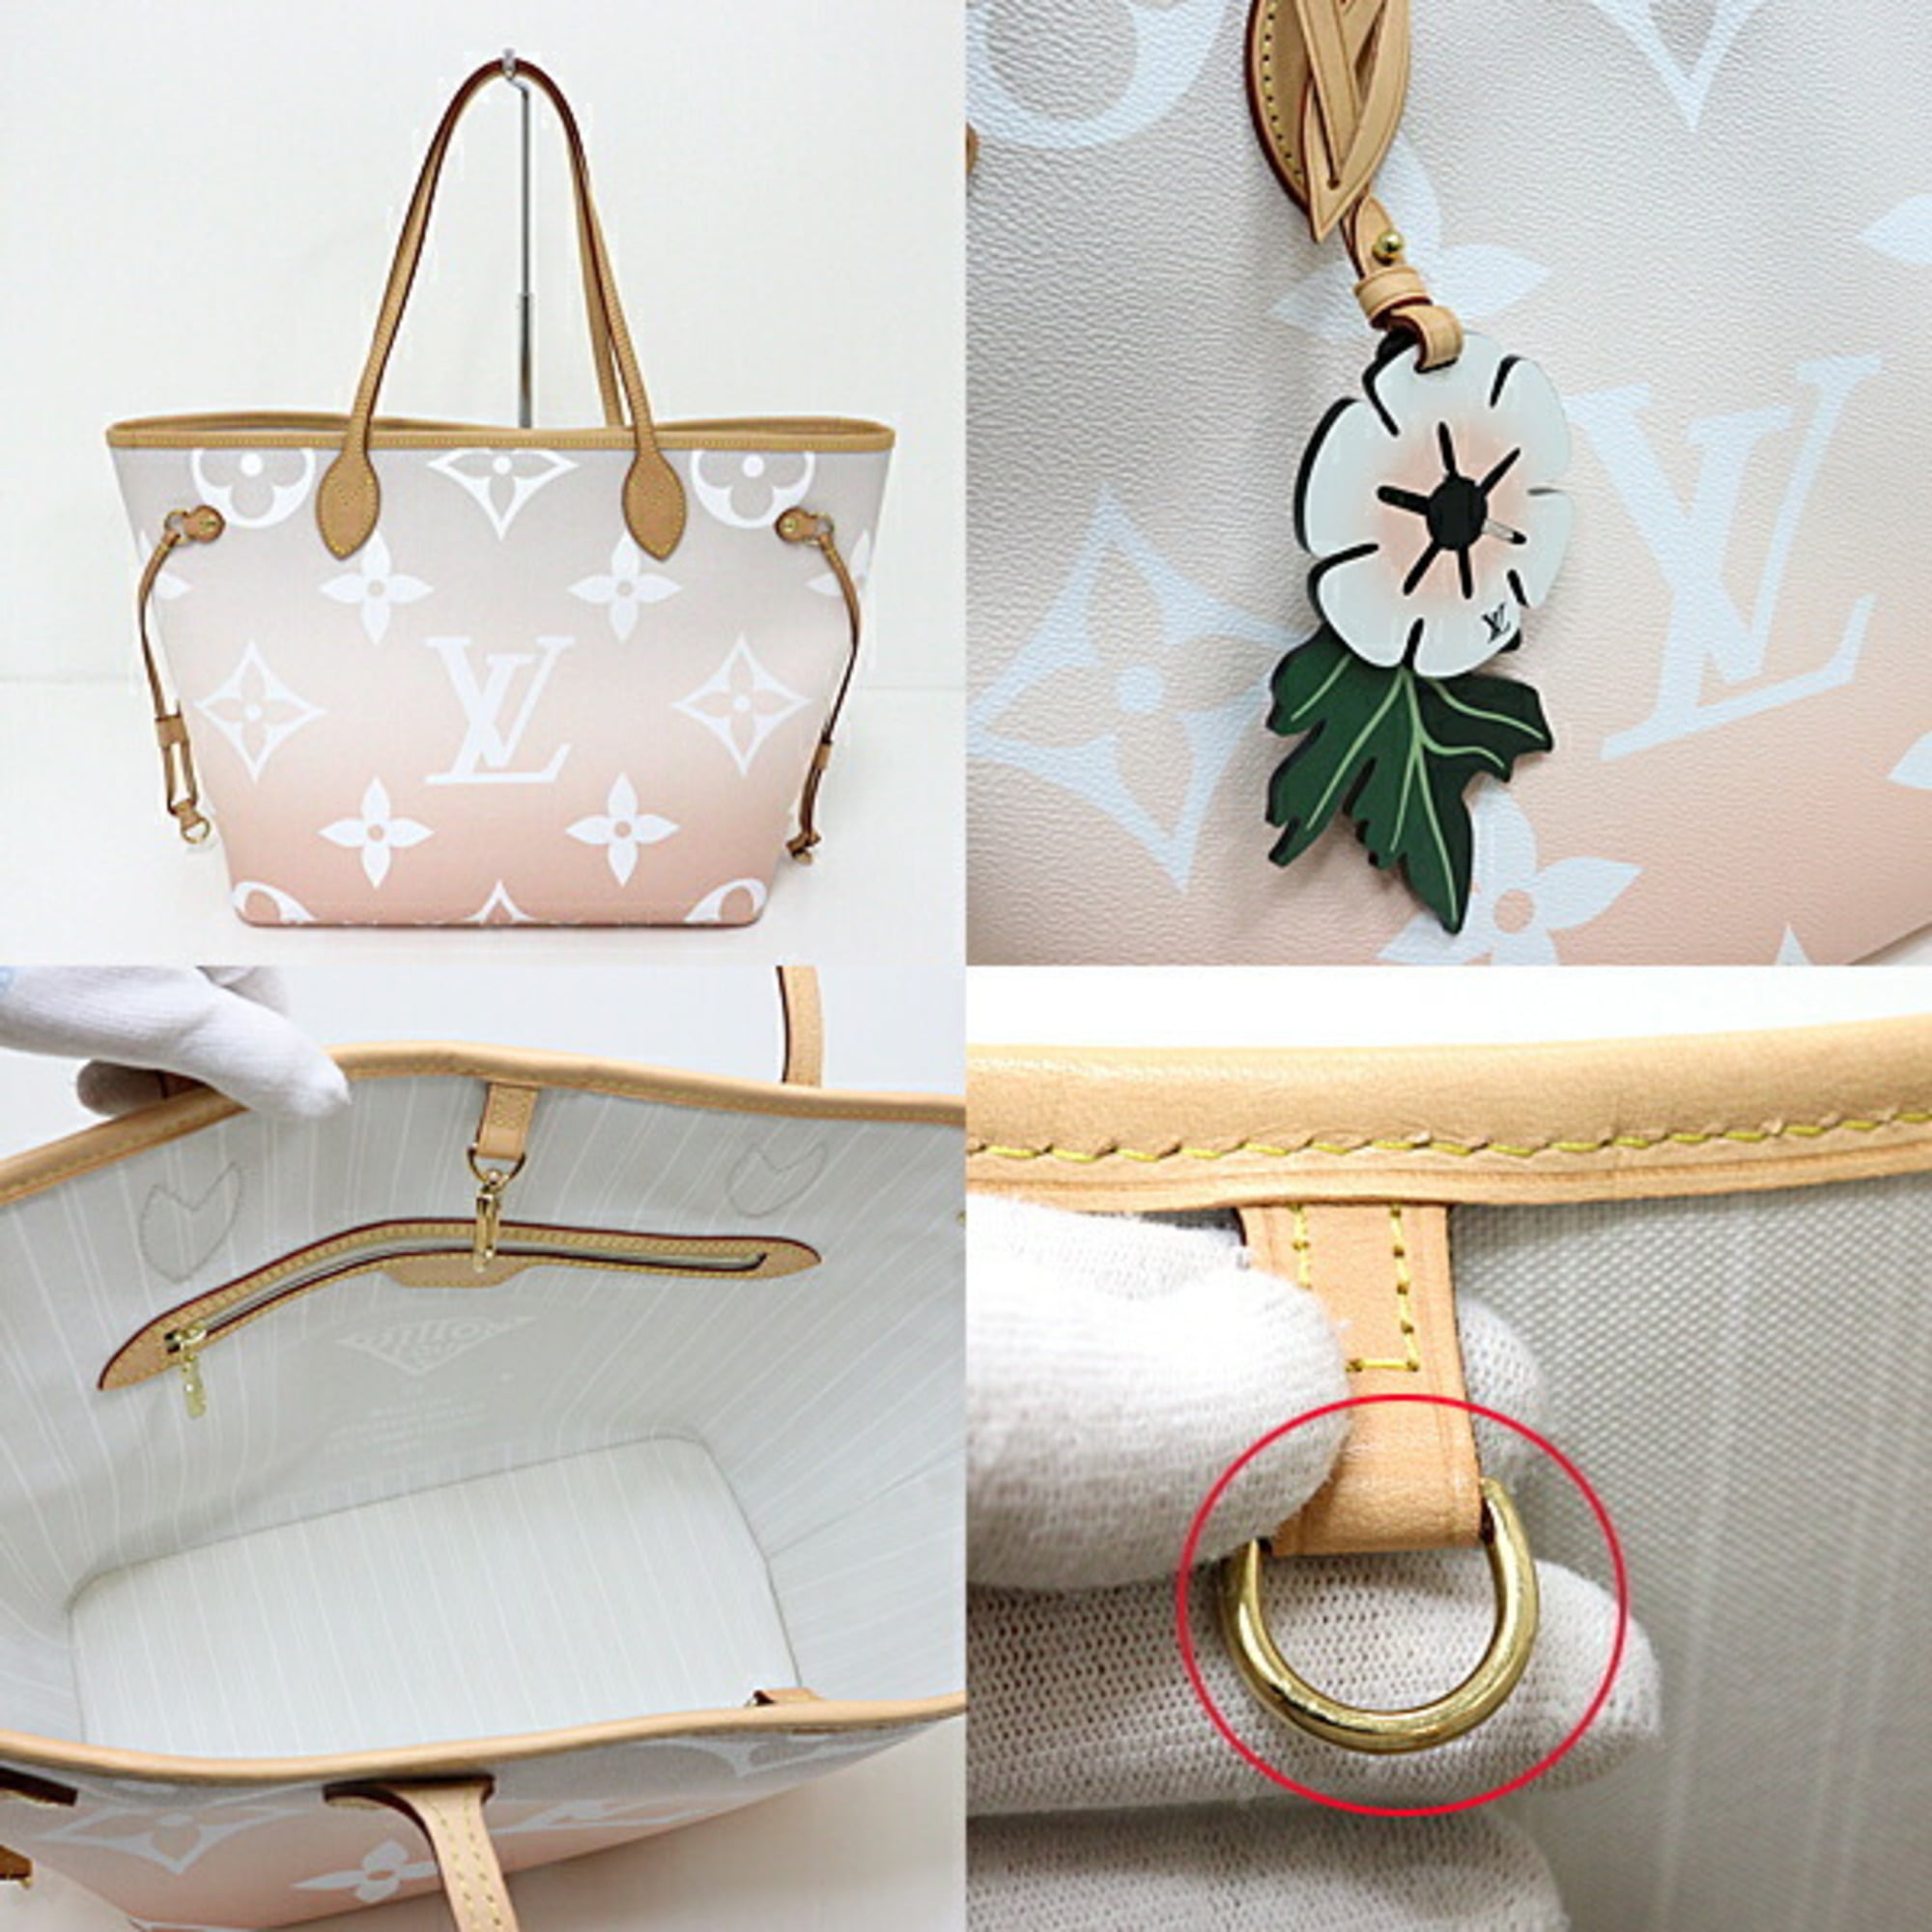 Louis Vuitton By The Pool Neverfull M45680– TC